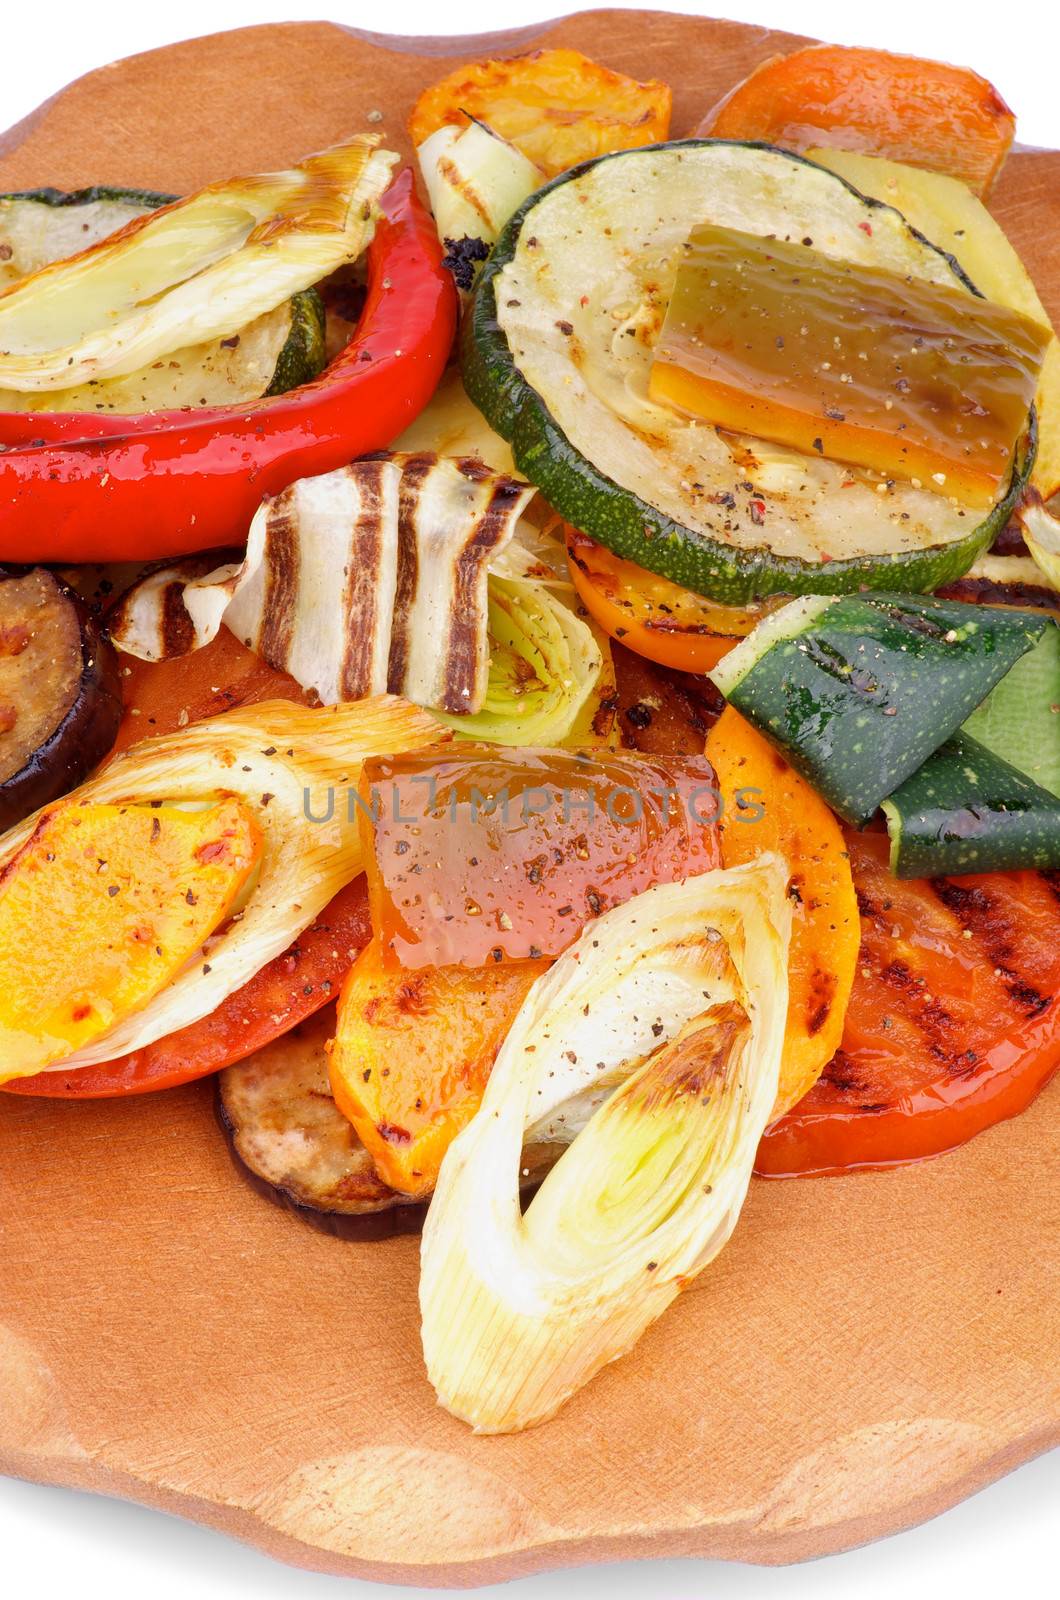 Grilled Vegetables by zhekos